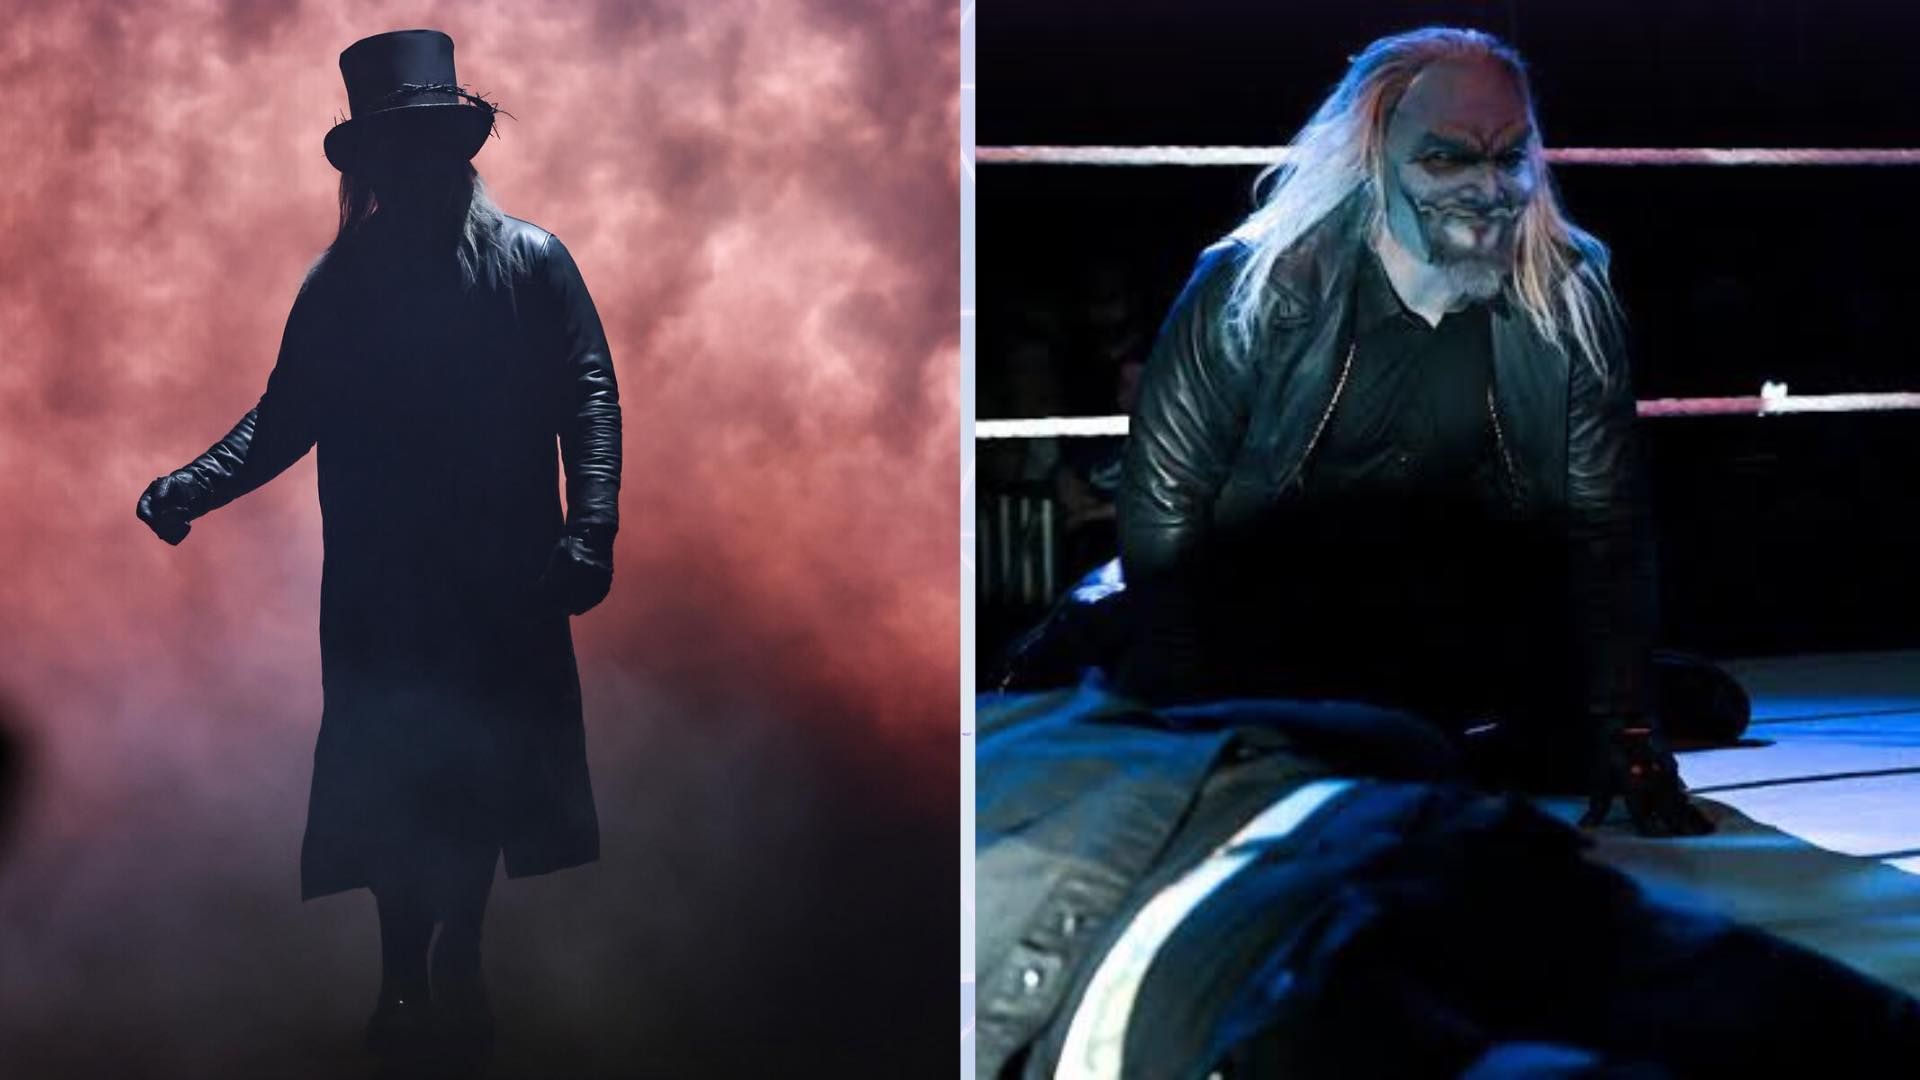 All clues point to Uncle Howdy [Images courtesy wwe.com]